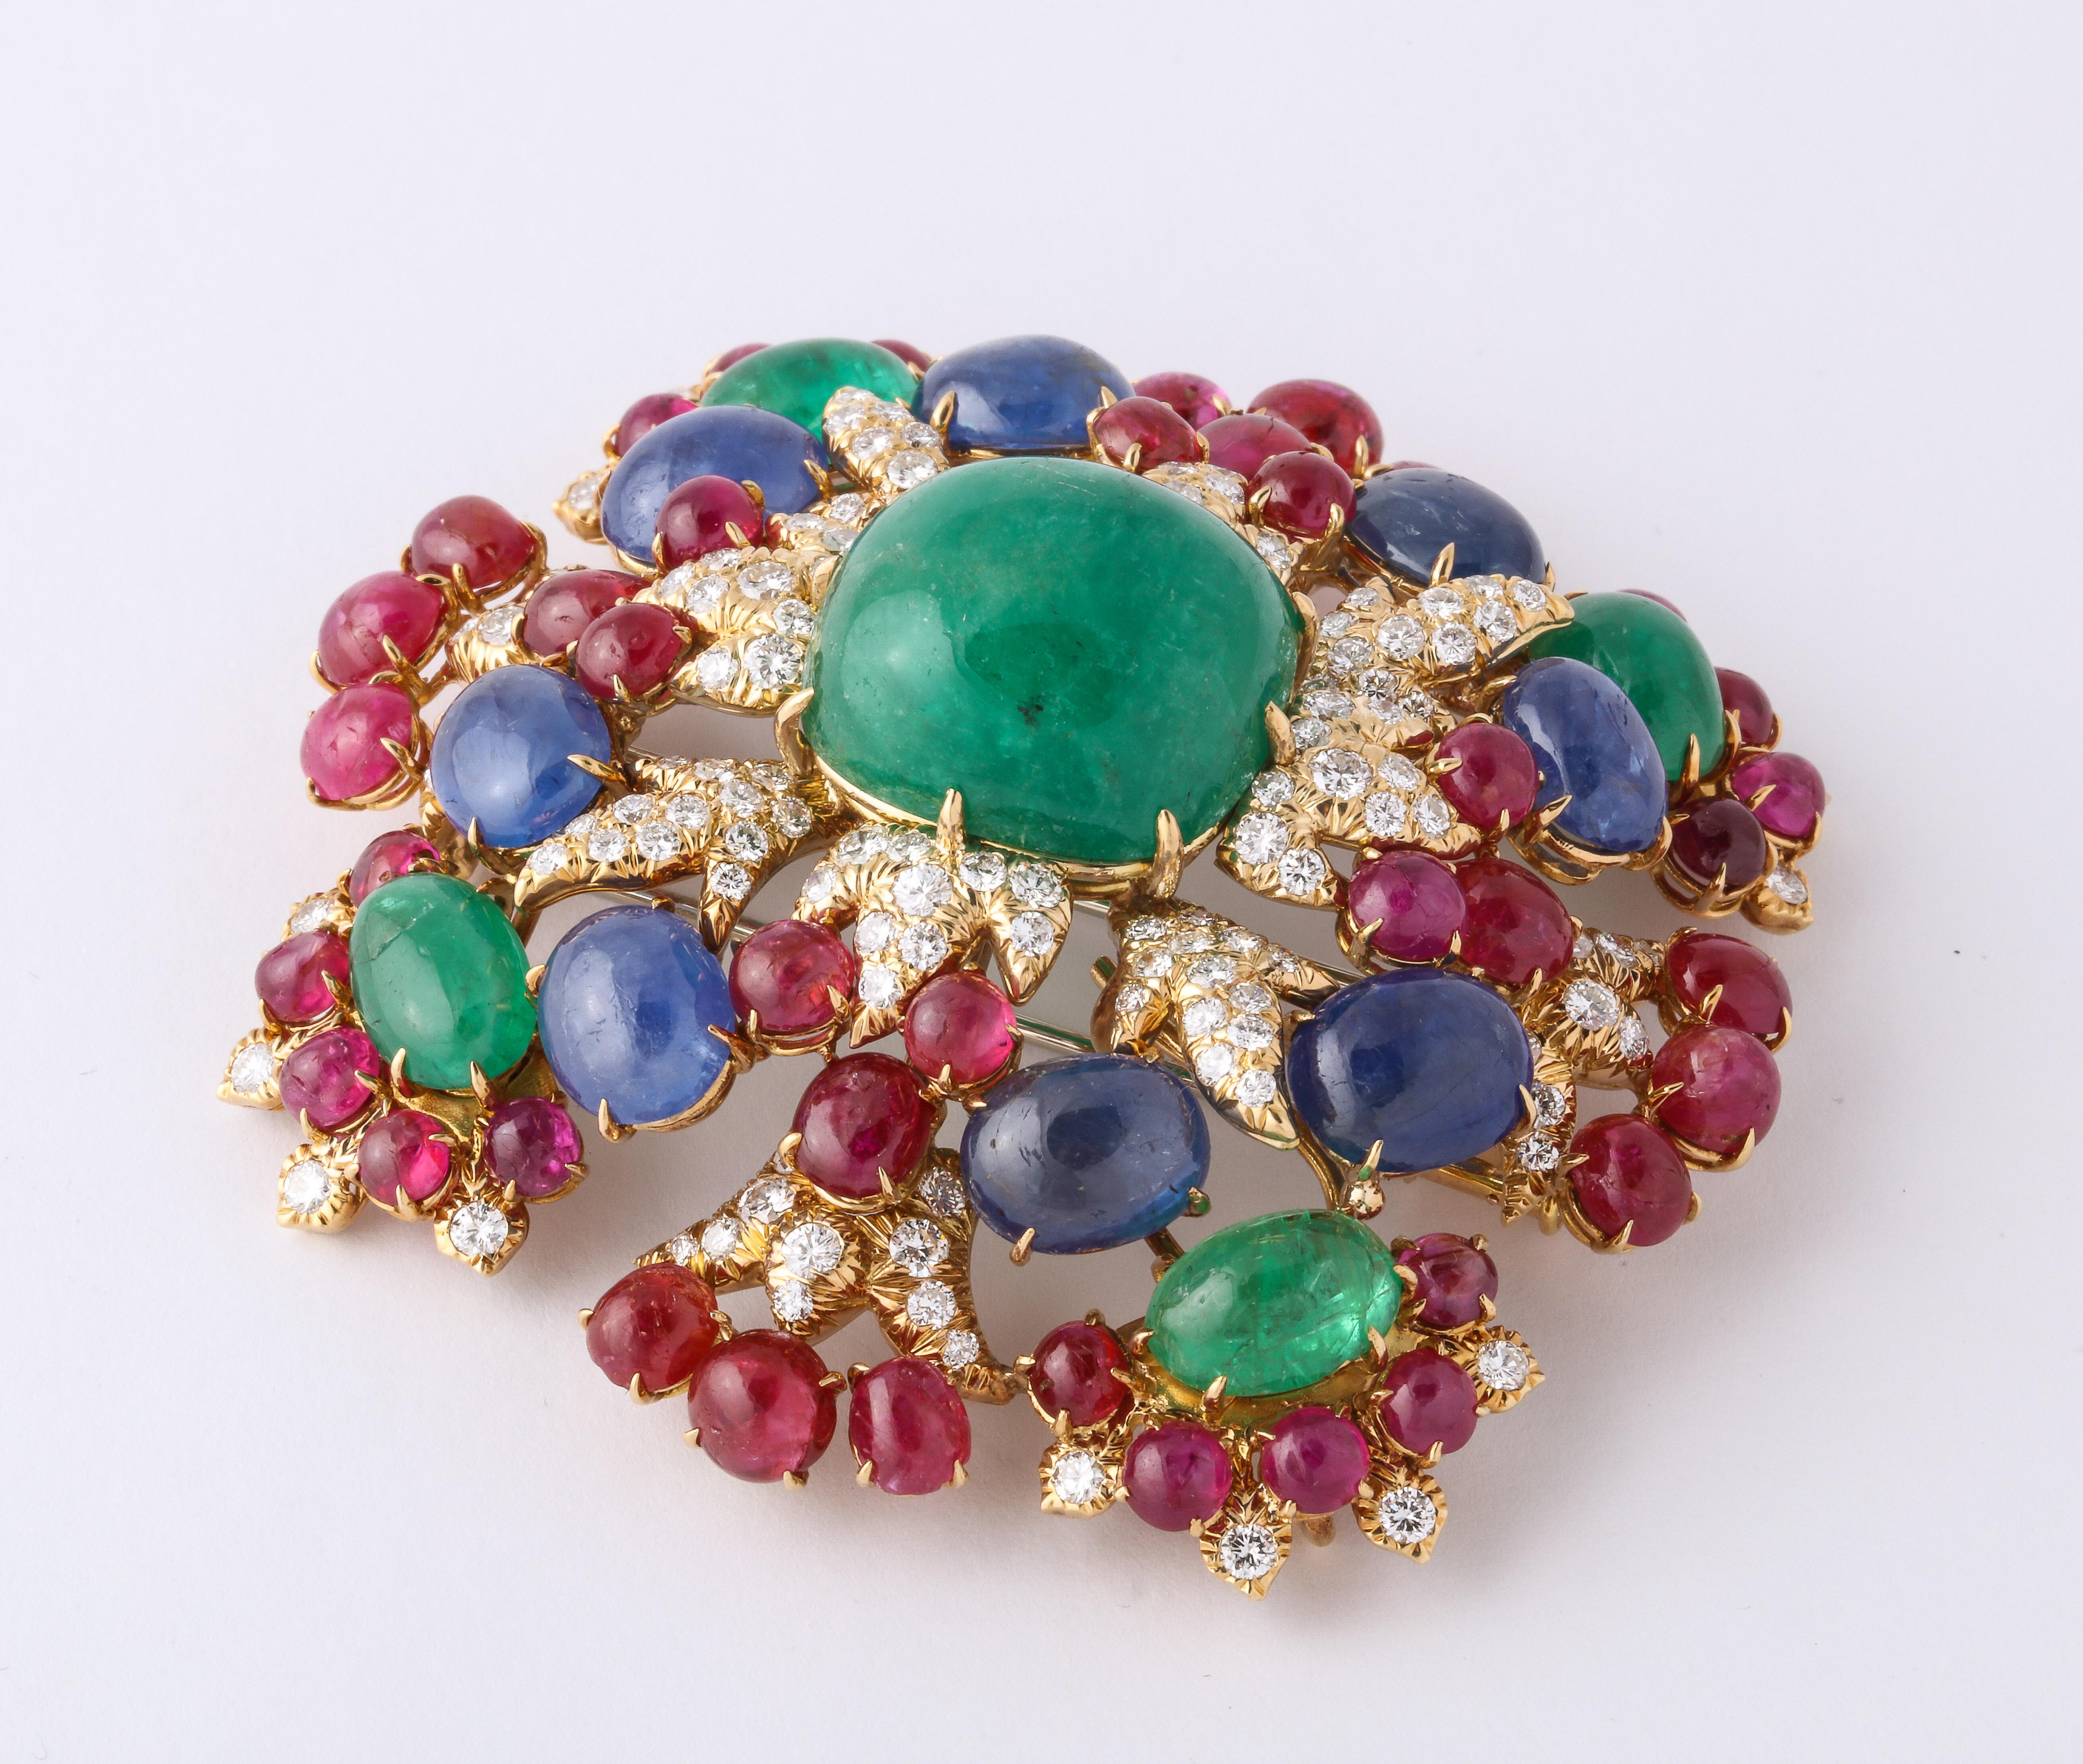 David Webb Brooch  And Pendant in 64 gm of yellow gold, 124 full cut diamonds, 48 natural ruby cabochons,  8 natural sapphire cabochons,  5 natural emerald cabochons. It is marked Webb 18 and can be worn as a pin in a square shape and as a pendant. 